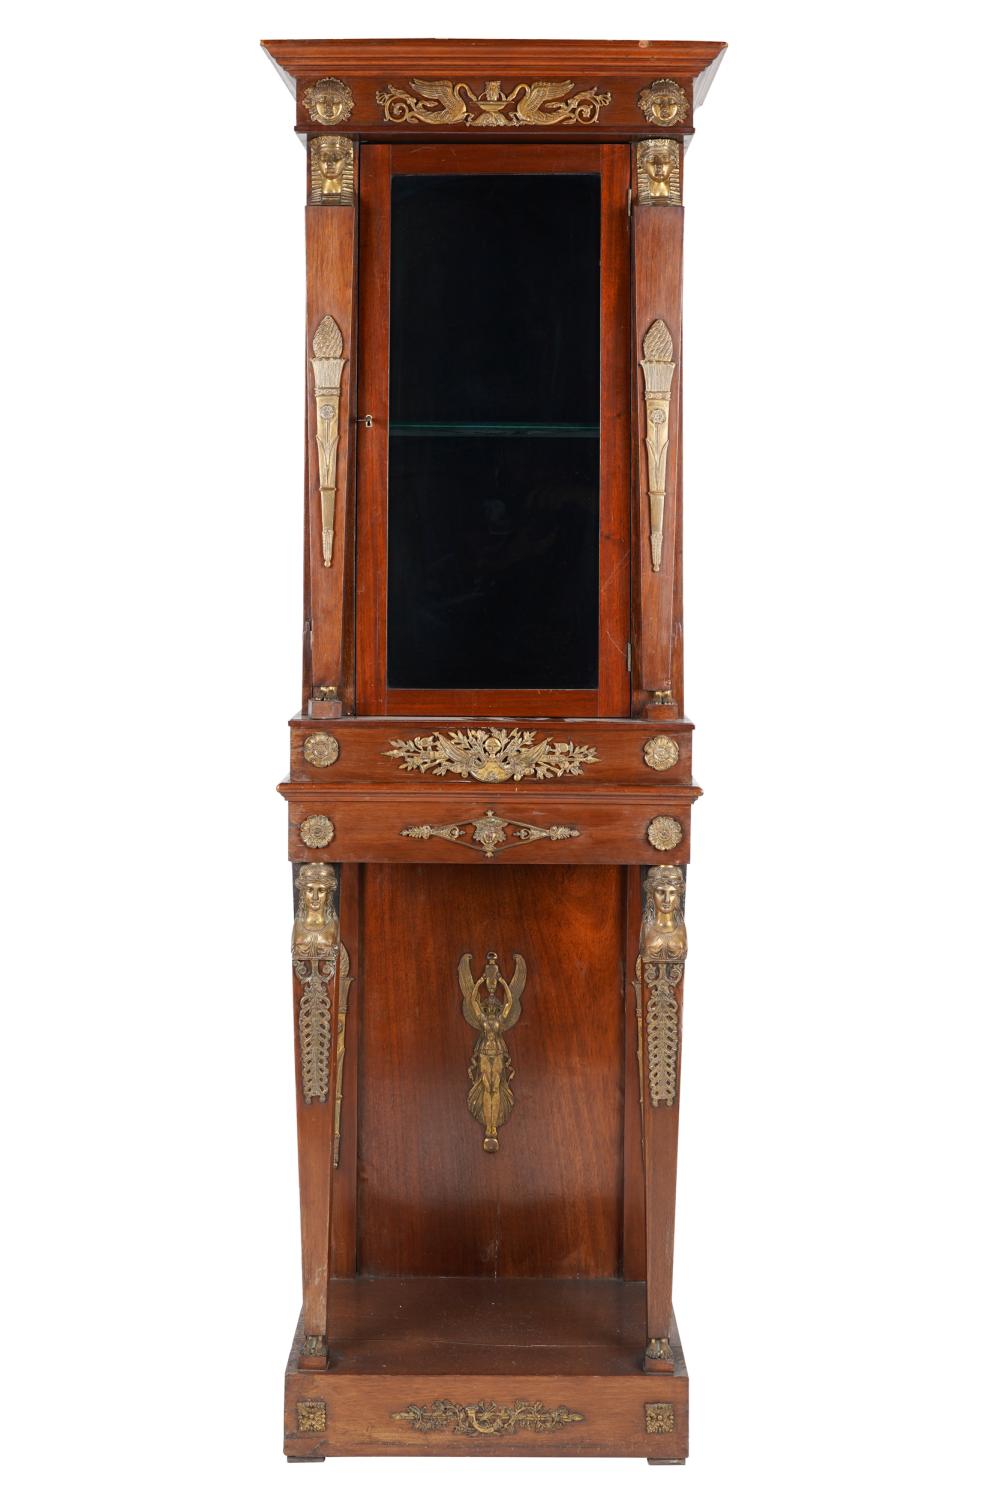 EMPIRE STYLE CABINET ON STANDin 33367c